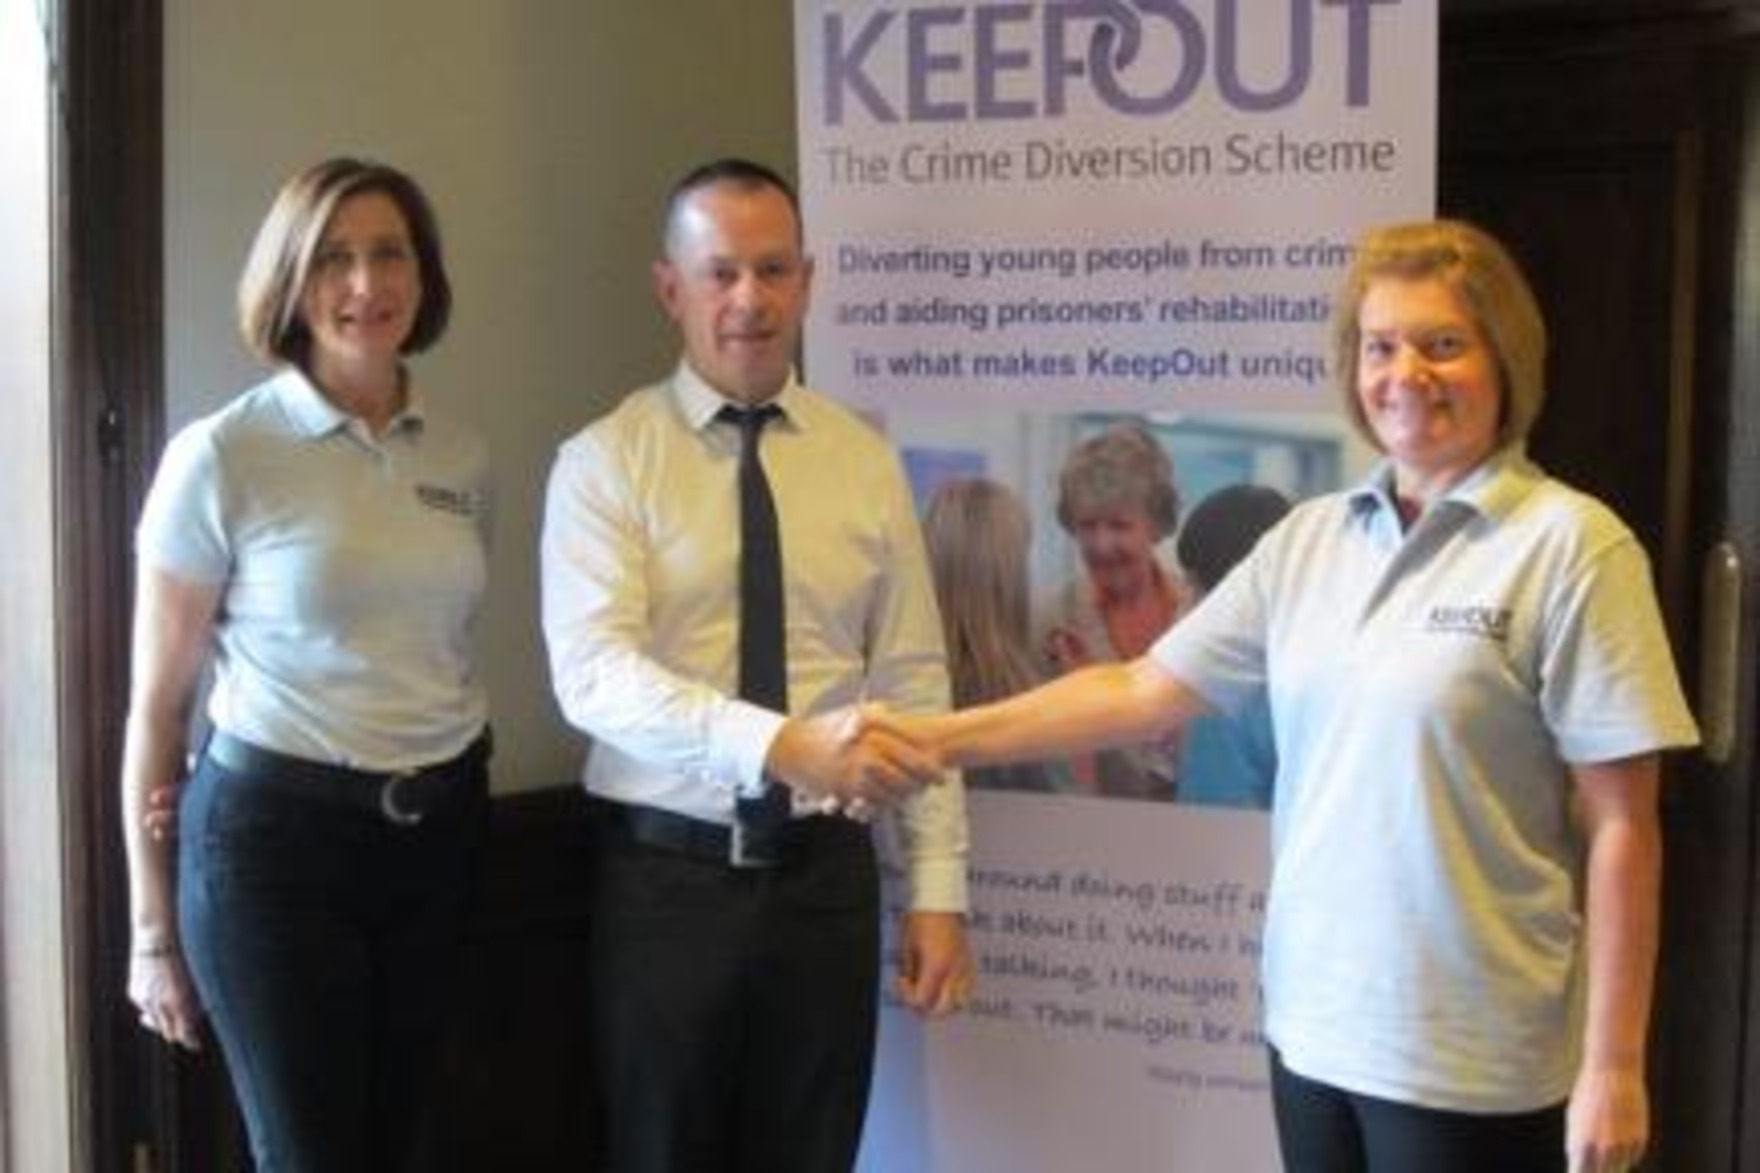 Keepout receives funding from London Masons